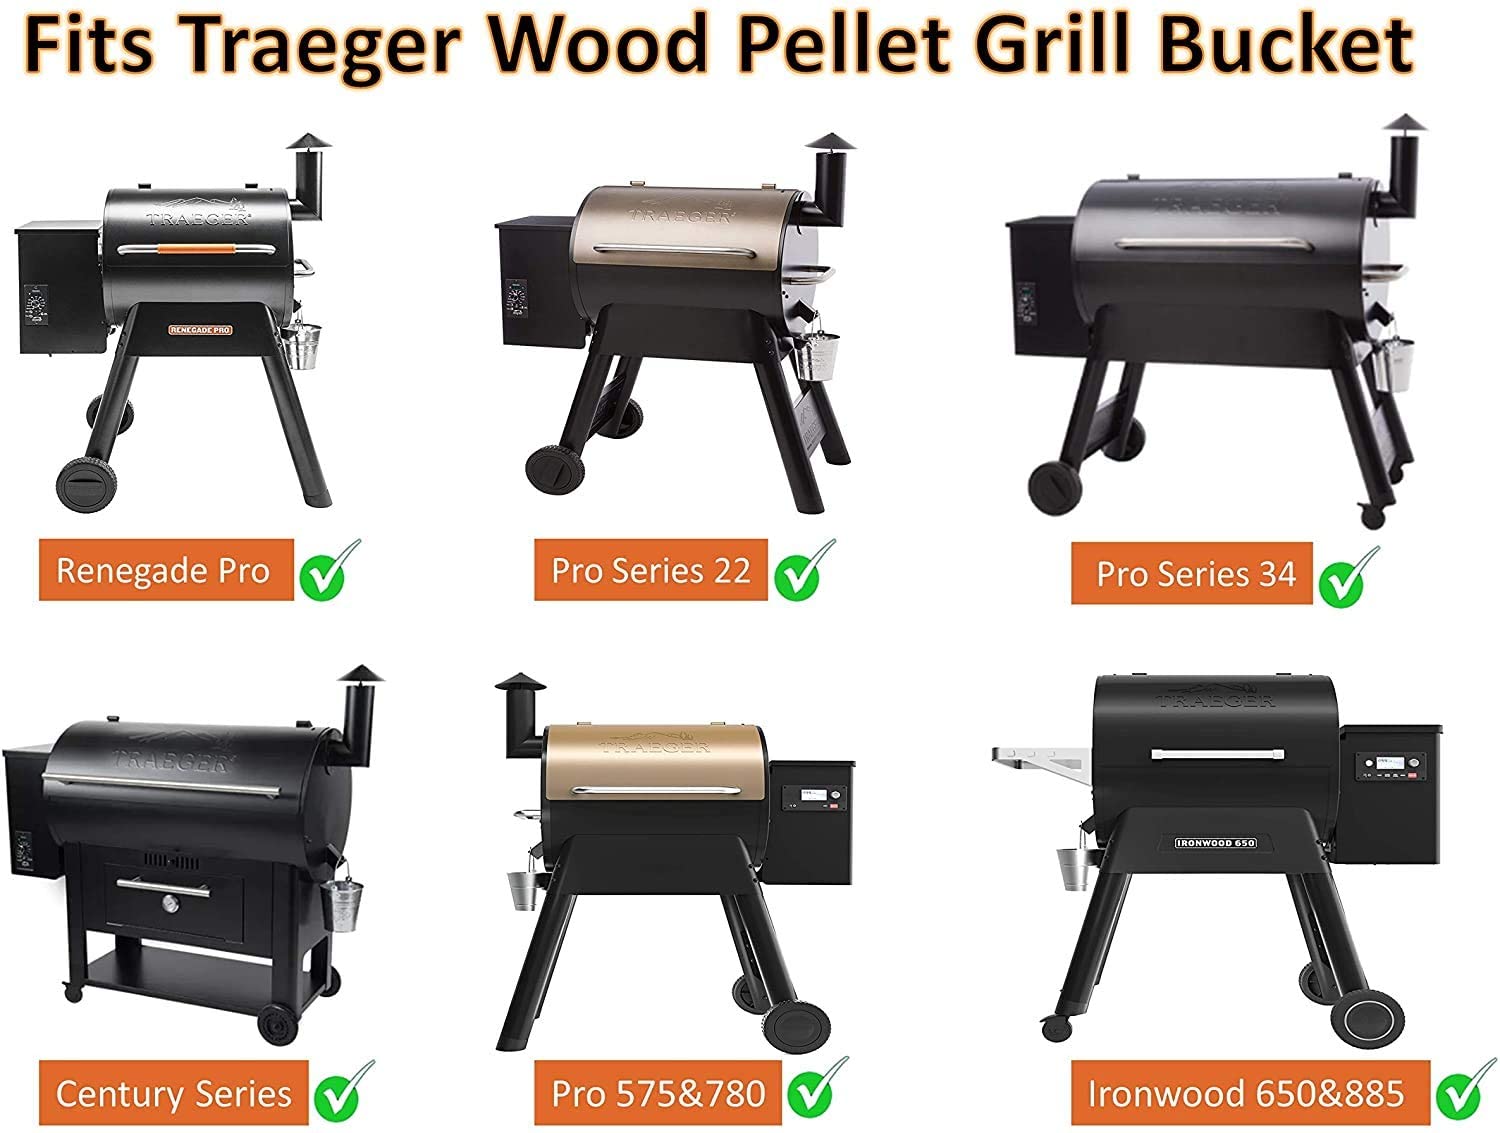 12-Pack Grease Bucket Liners Replacement for Traeger Wood Pellet BBQ Grill, GMG Davy Crockett Smoker Accessories